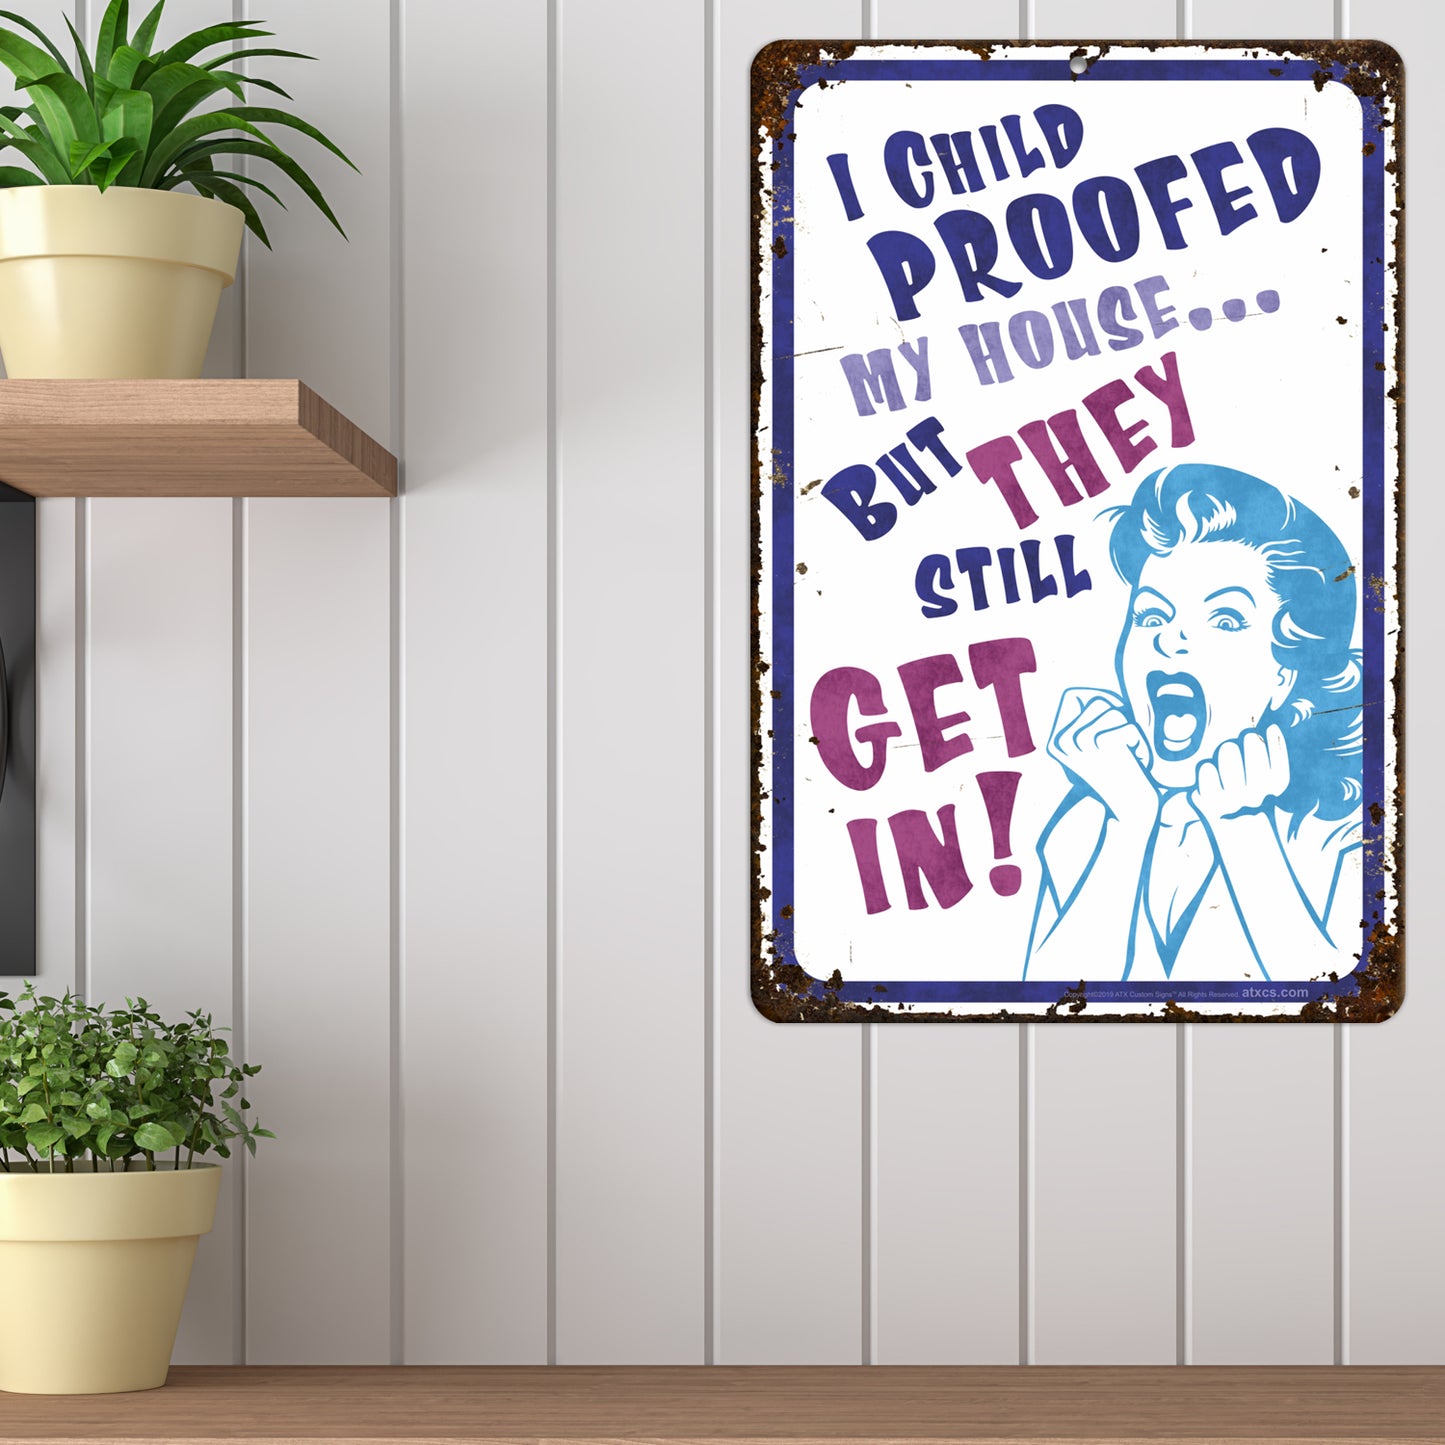 Funny Metal Sign - I Child Proofed My House. but They Still get in! (Antique Design) - Size 8 x 12